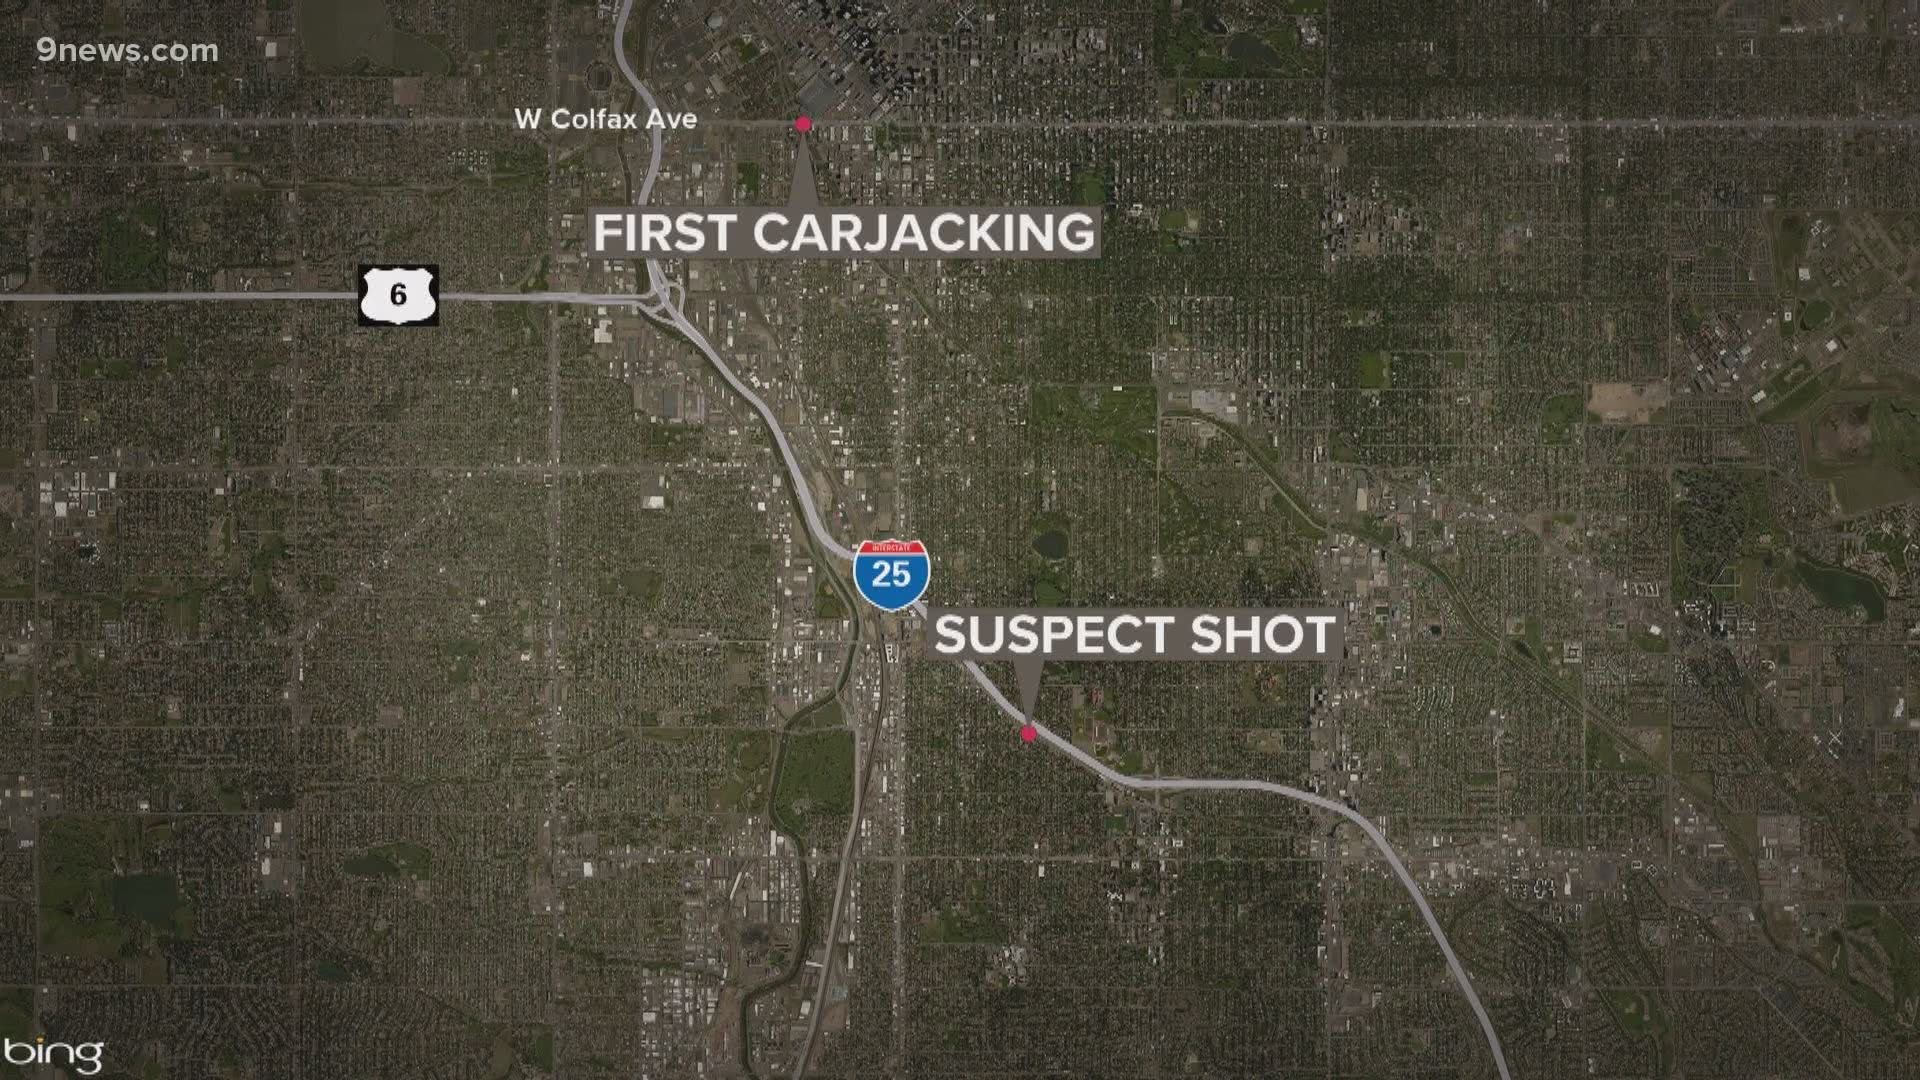 The suspect had already stolen one vehicle before they were shot while trying to carjack another vehicle, police said.